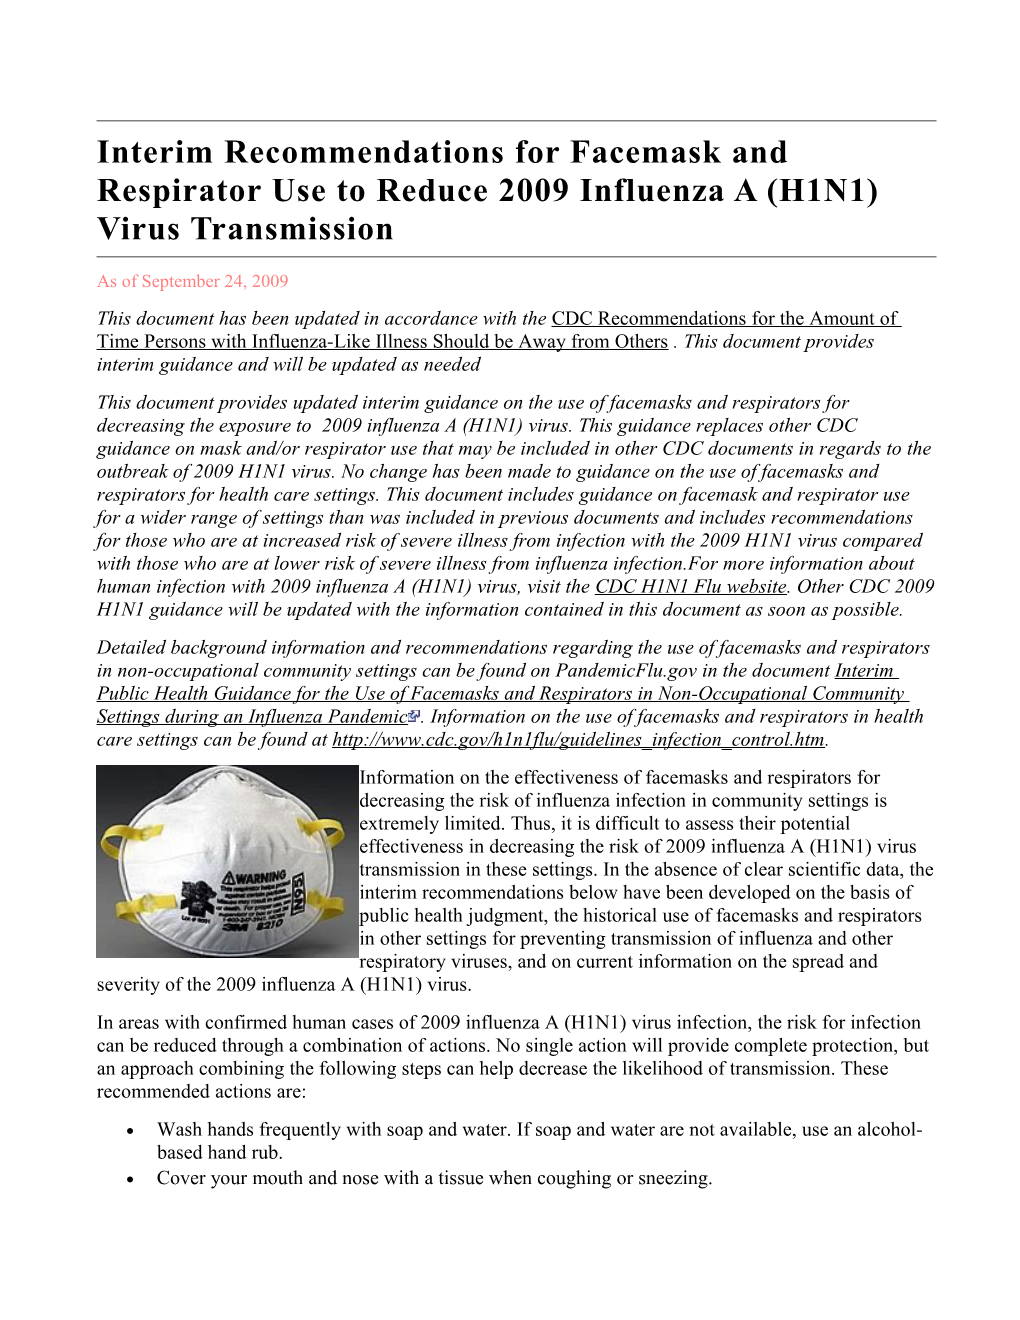 Interim Recommendations for Facemask and Respirator Use to Reduce 2009 Influenza a (H1N1)